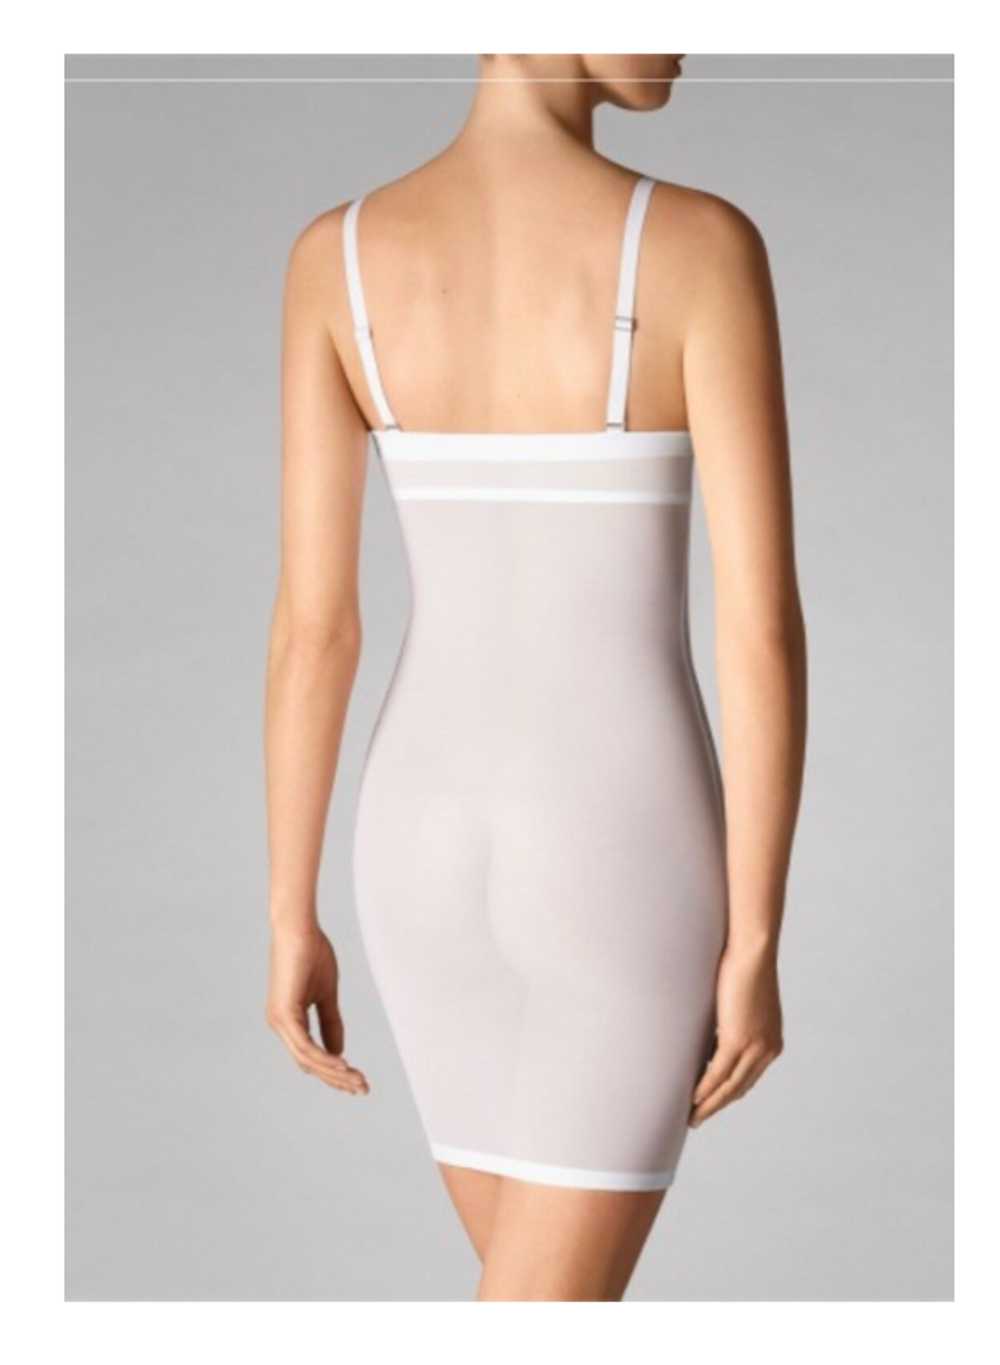 Wolford Wolford White Stretch Body Chemise - image 2